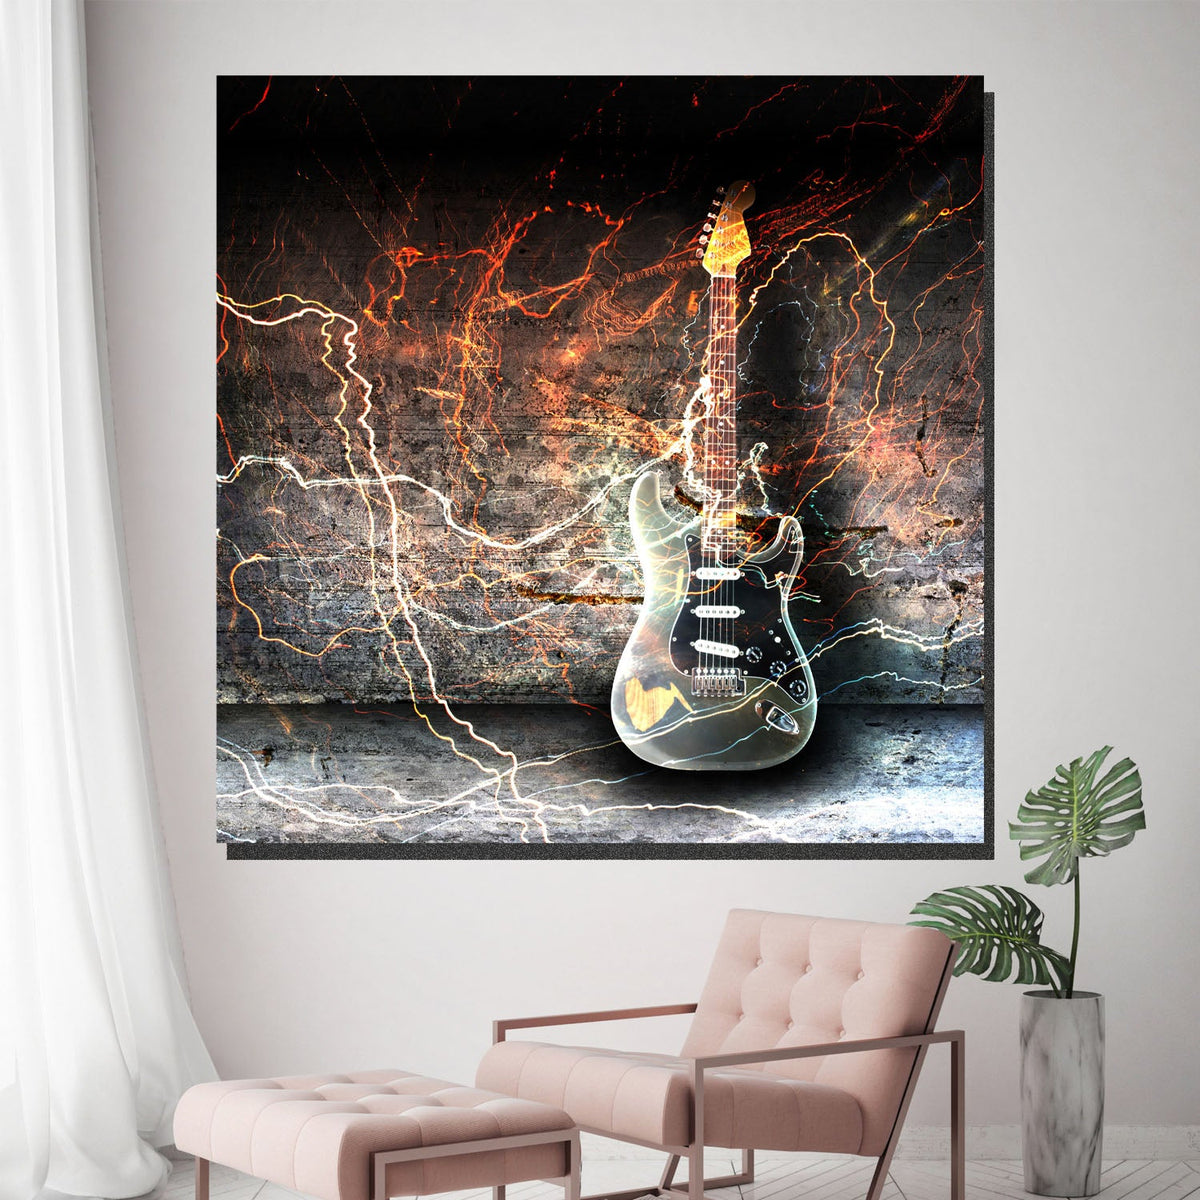 https://cdn.shopify.com/s/files/1/0387/9986/8044/products/ElectricGuitarVibesCanvasArtprintStretched-1.jpg